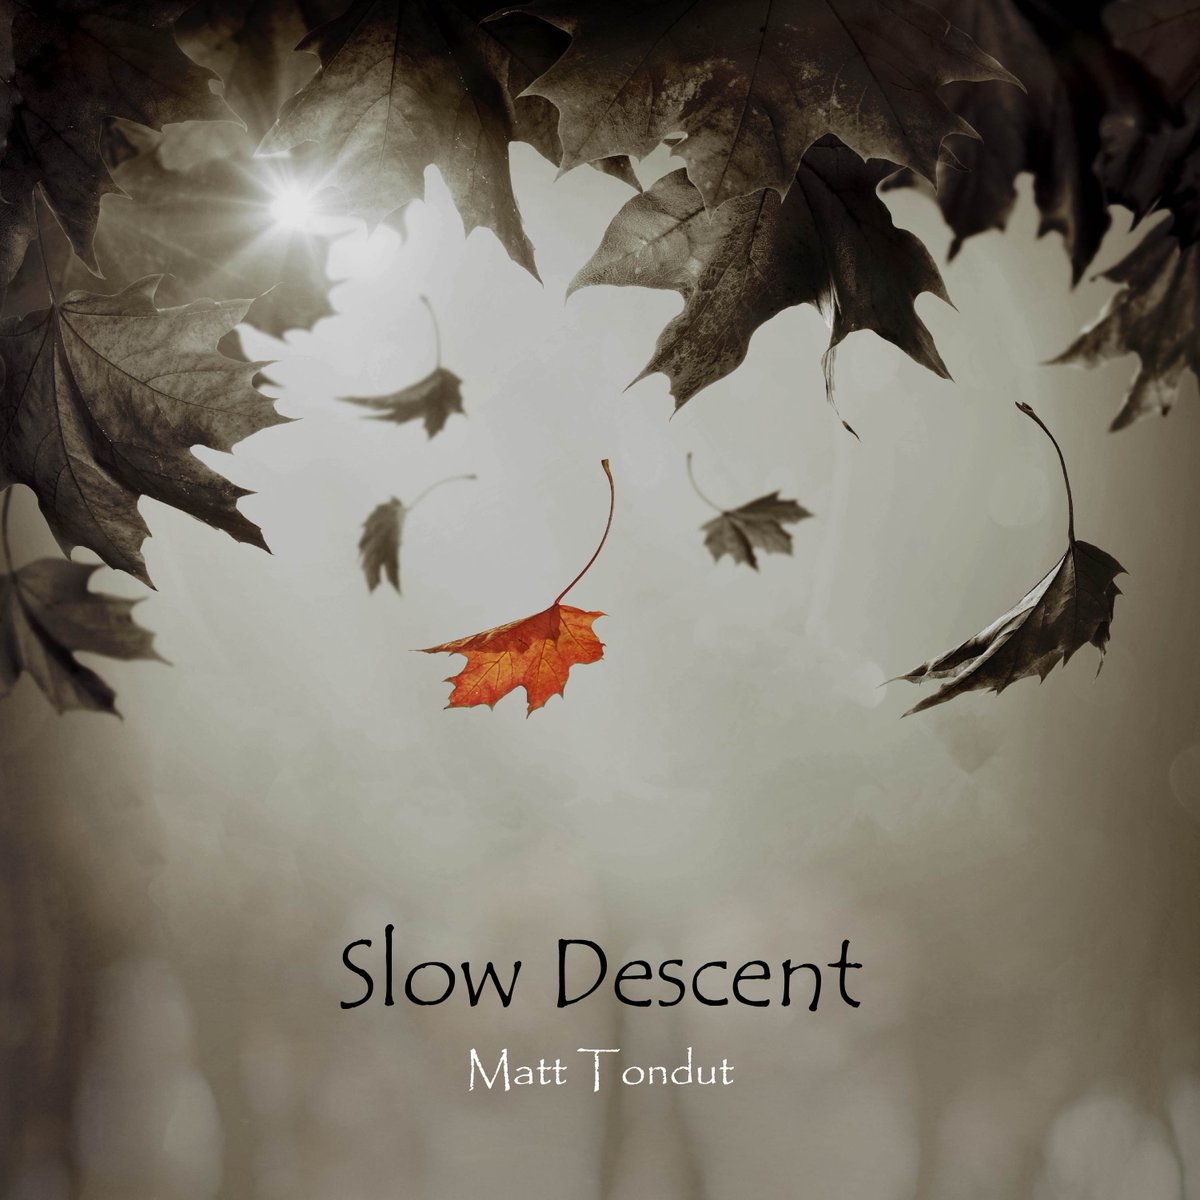 We are proud to present you with our latest release! Slow Descent is a soft piano instrumental piece composed & performed by Australian artist Matt Tondut. fanlink.to/matt_tondut_sl…